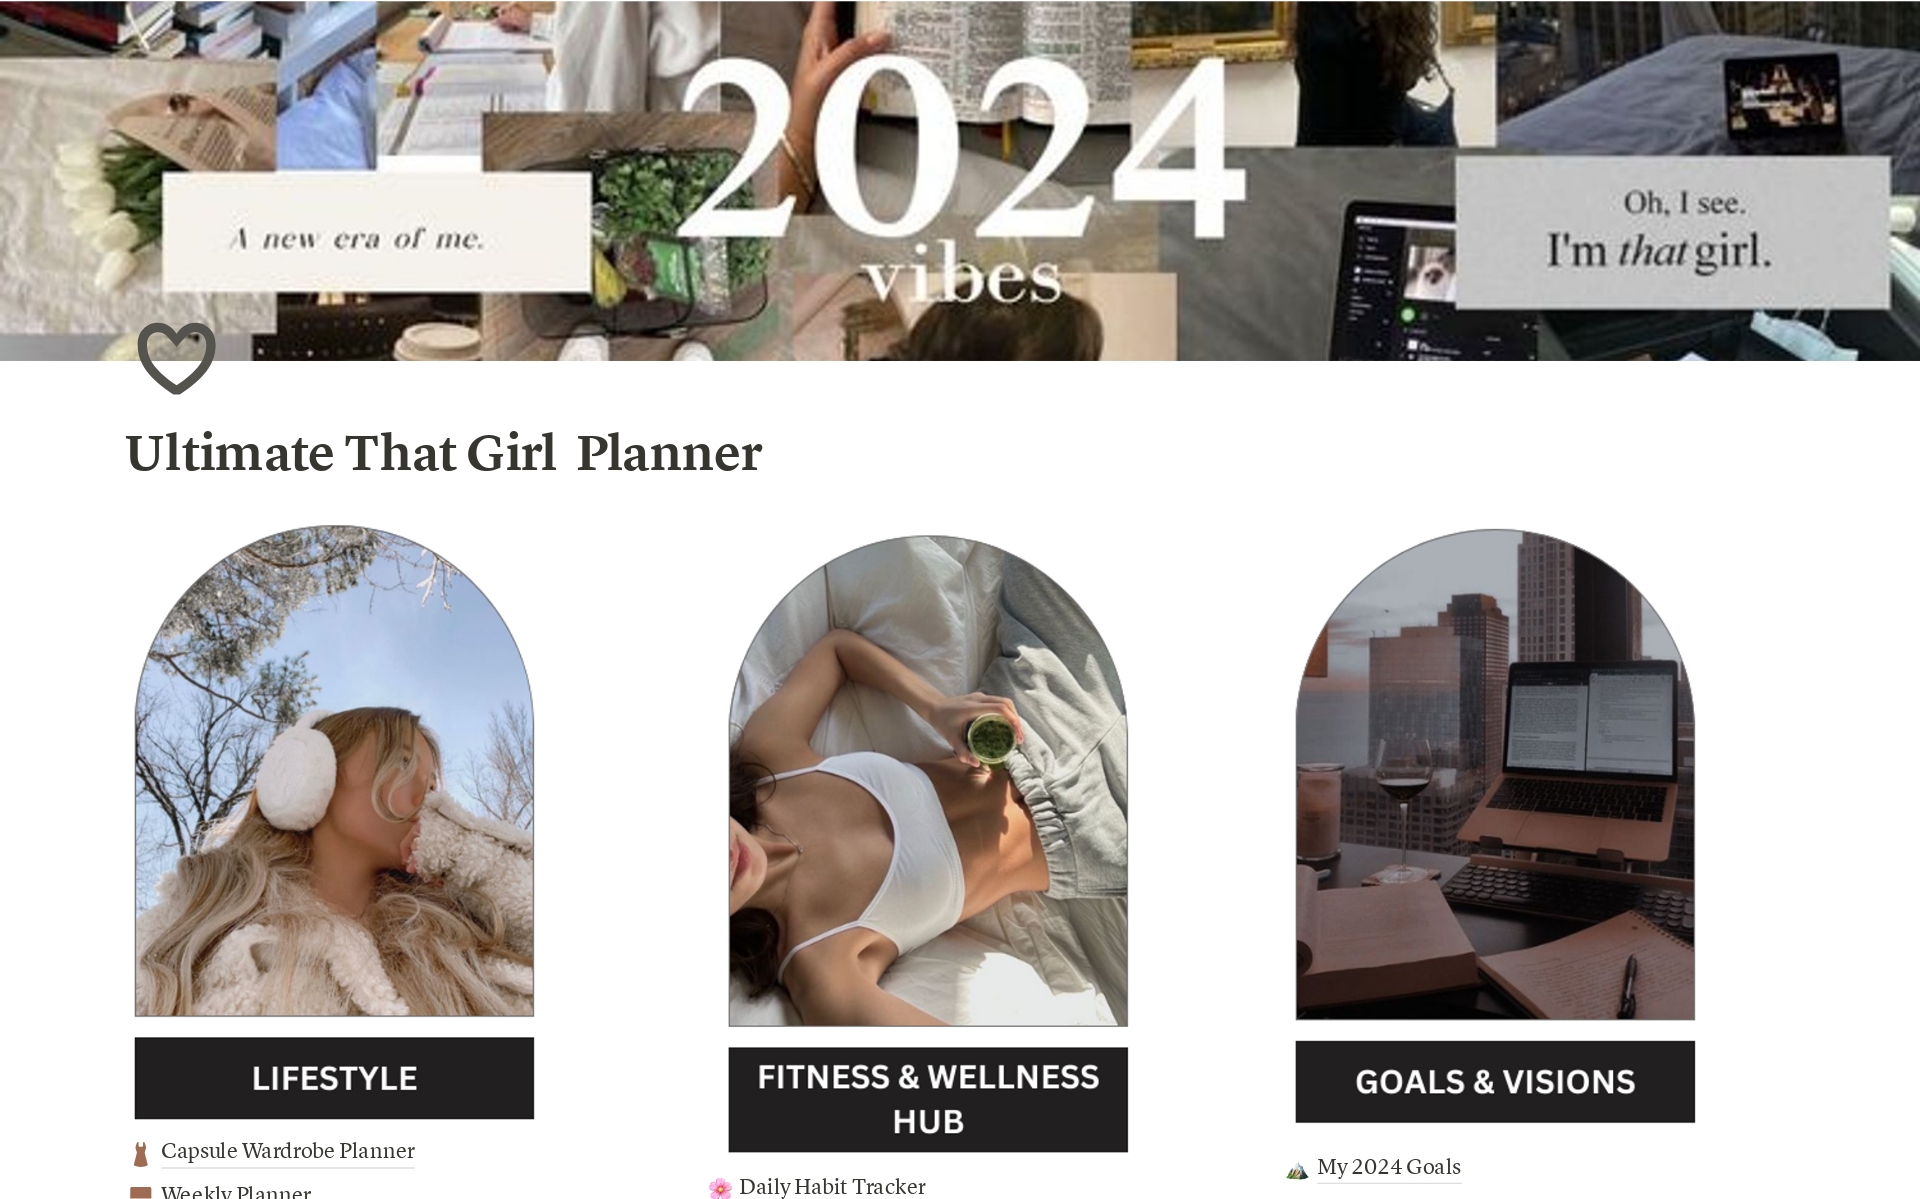 Welcome to the That Girl Ultimate Planner – your guide to a life full of style, goals, and wellness! This template encompasses three categories: Lifestyle, Goals and Visions, and Fitness & Wellness Hub. 